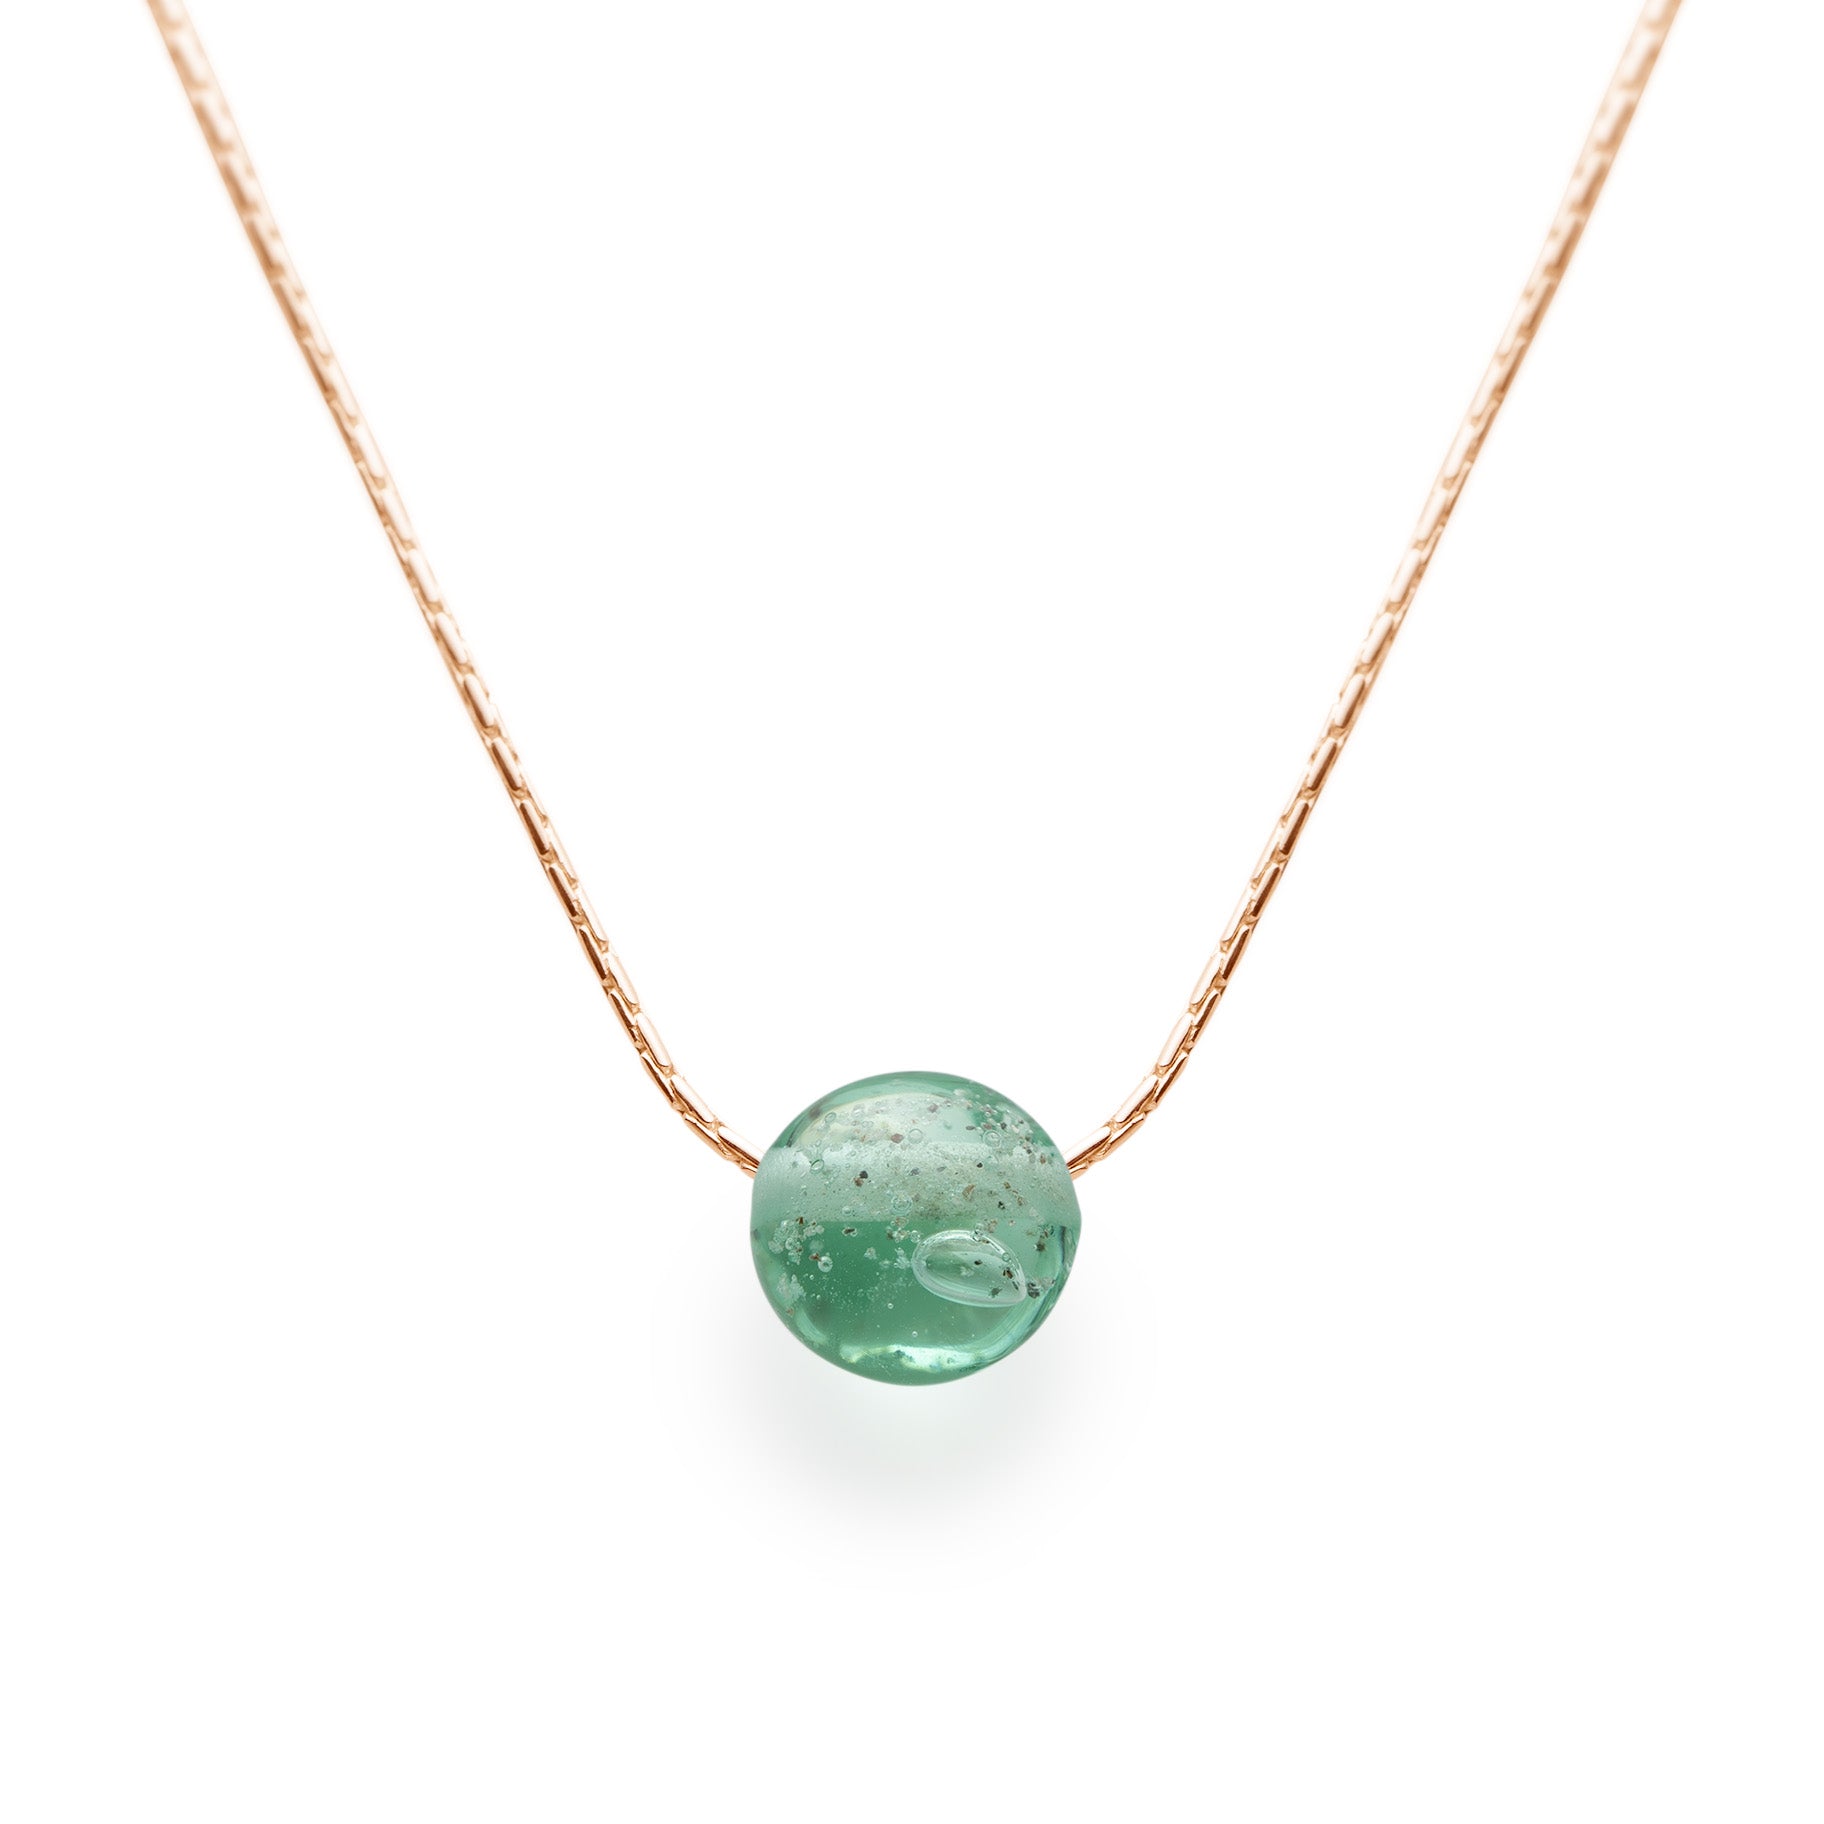 Sea green glass bead necklace with beach sand on gold fill fine chain necklace.